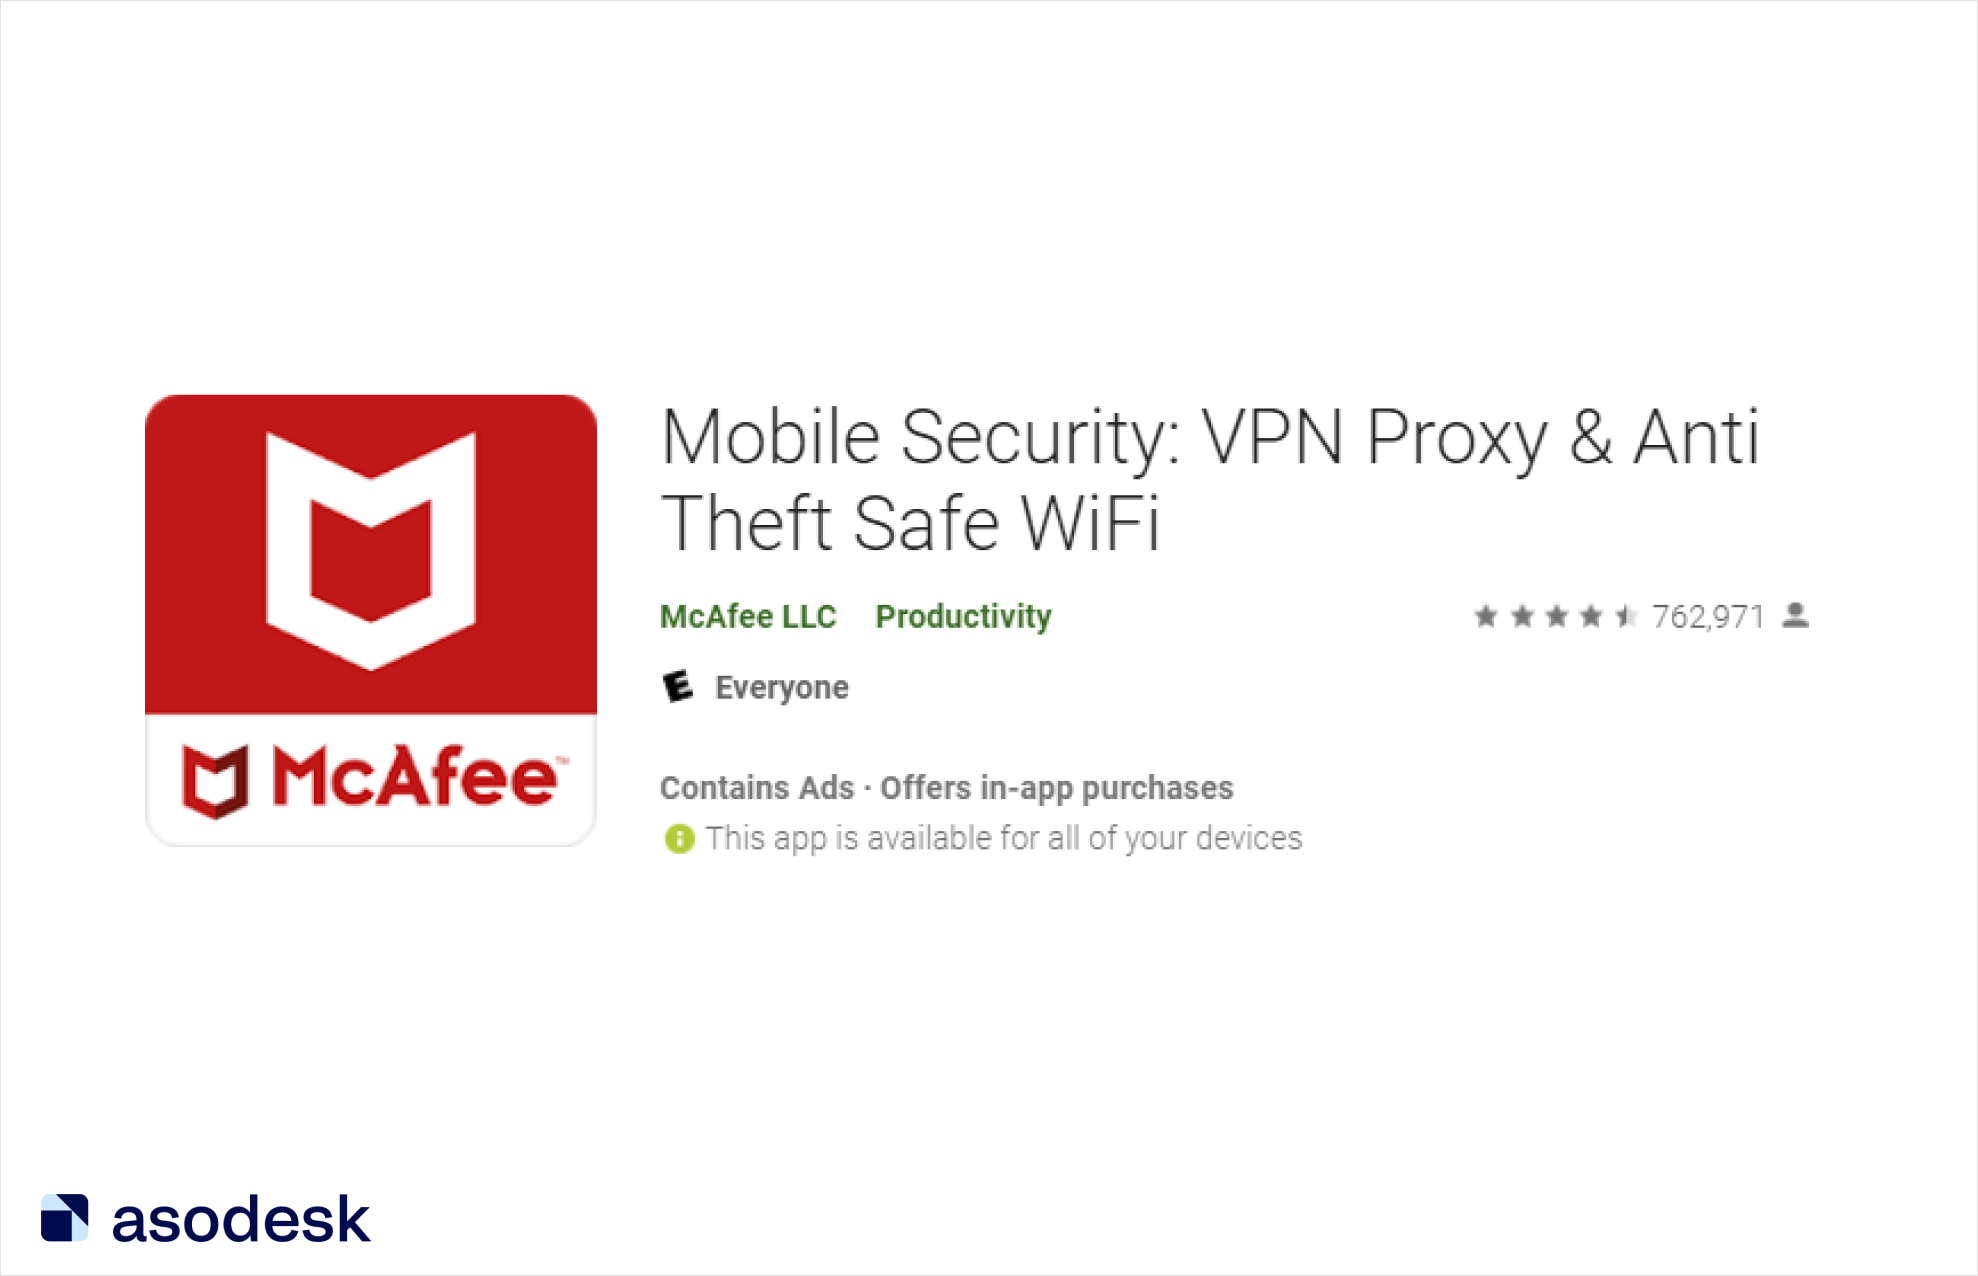 McAfee brand name was placed on the icon while the keywords “VPN” and “Safe WiFi” were indicated in the app name